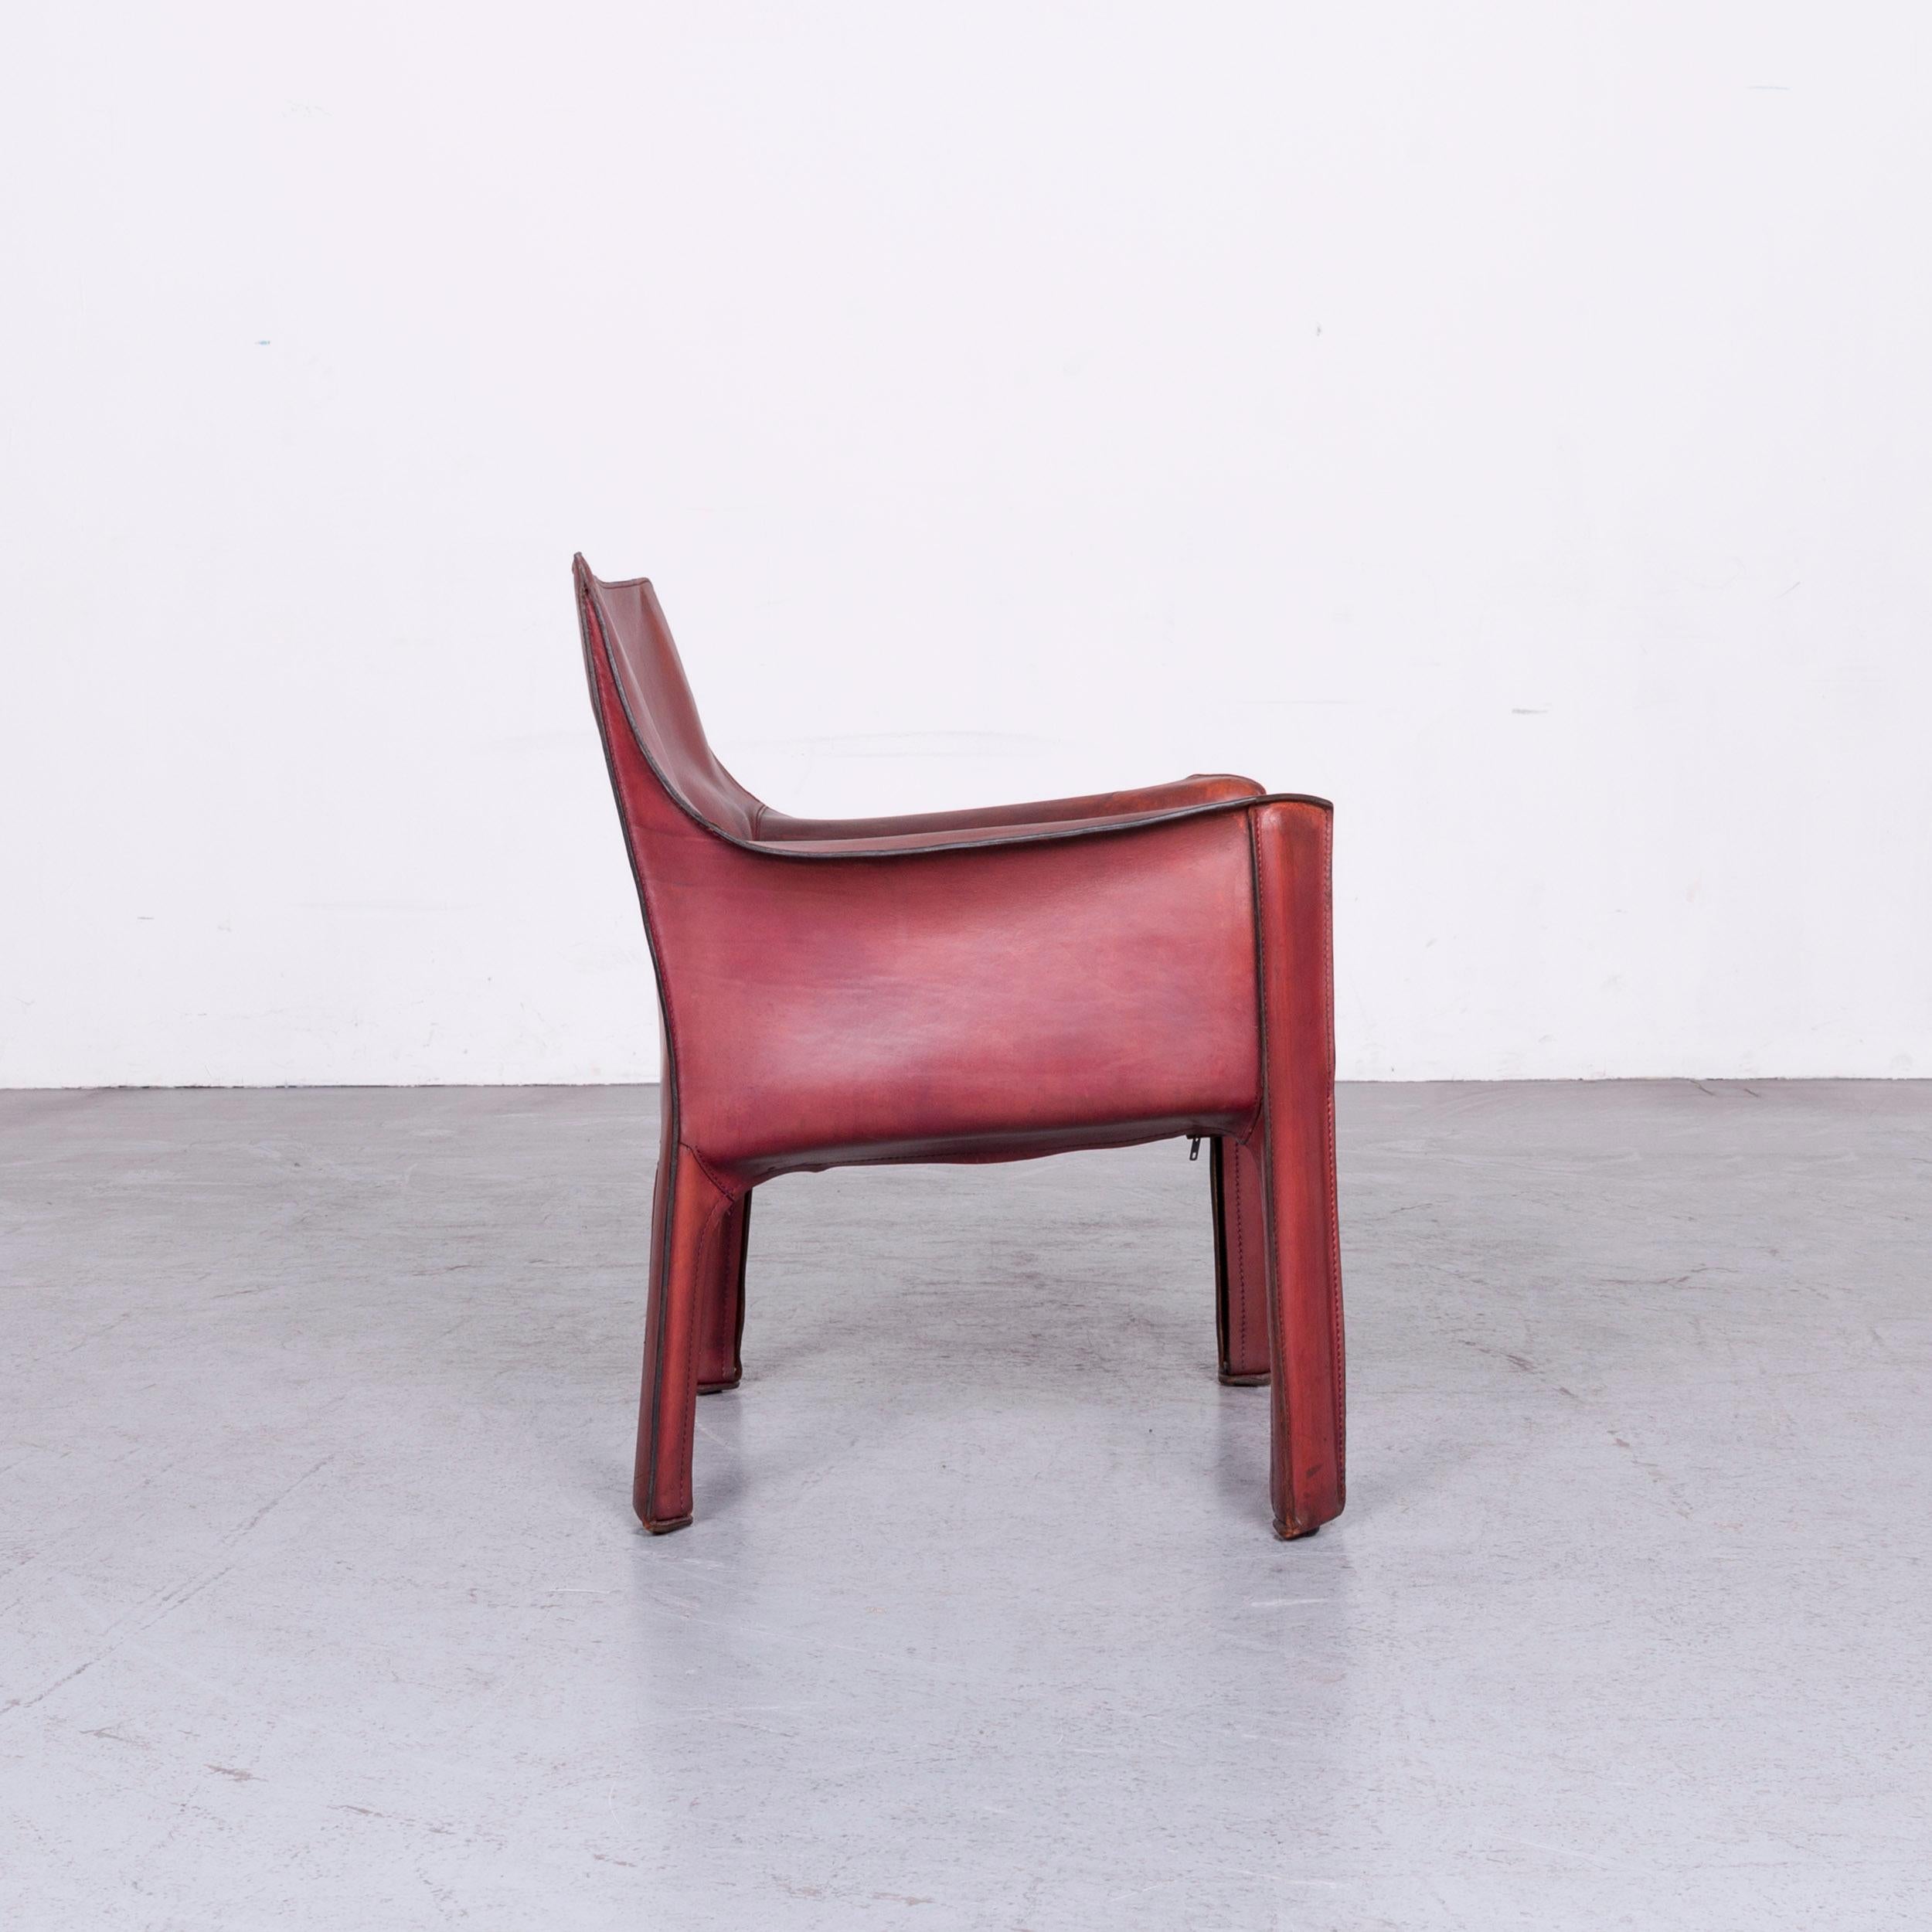 Cassina Cab 414 Vintage Leather Armchair Red by Mario Belinni 1970-1979 2